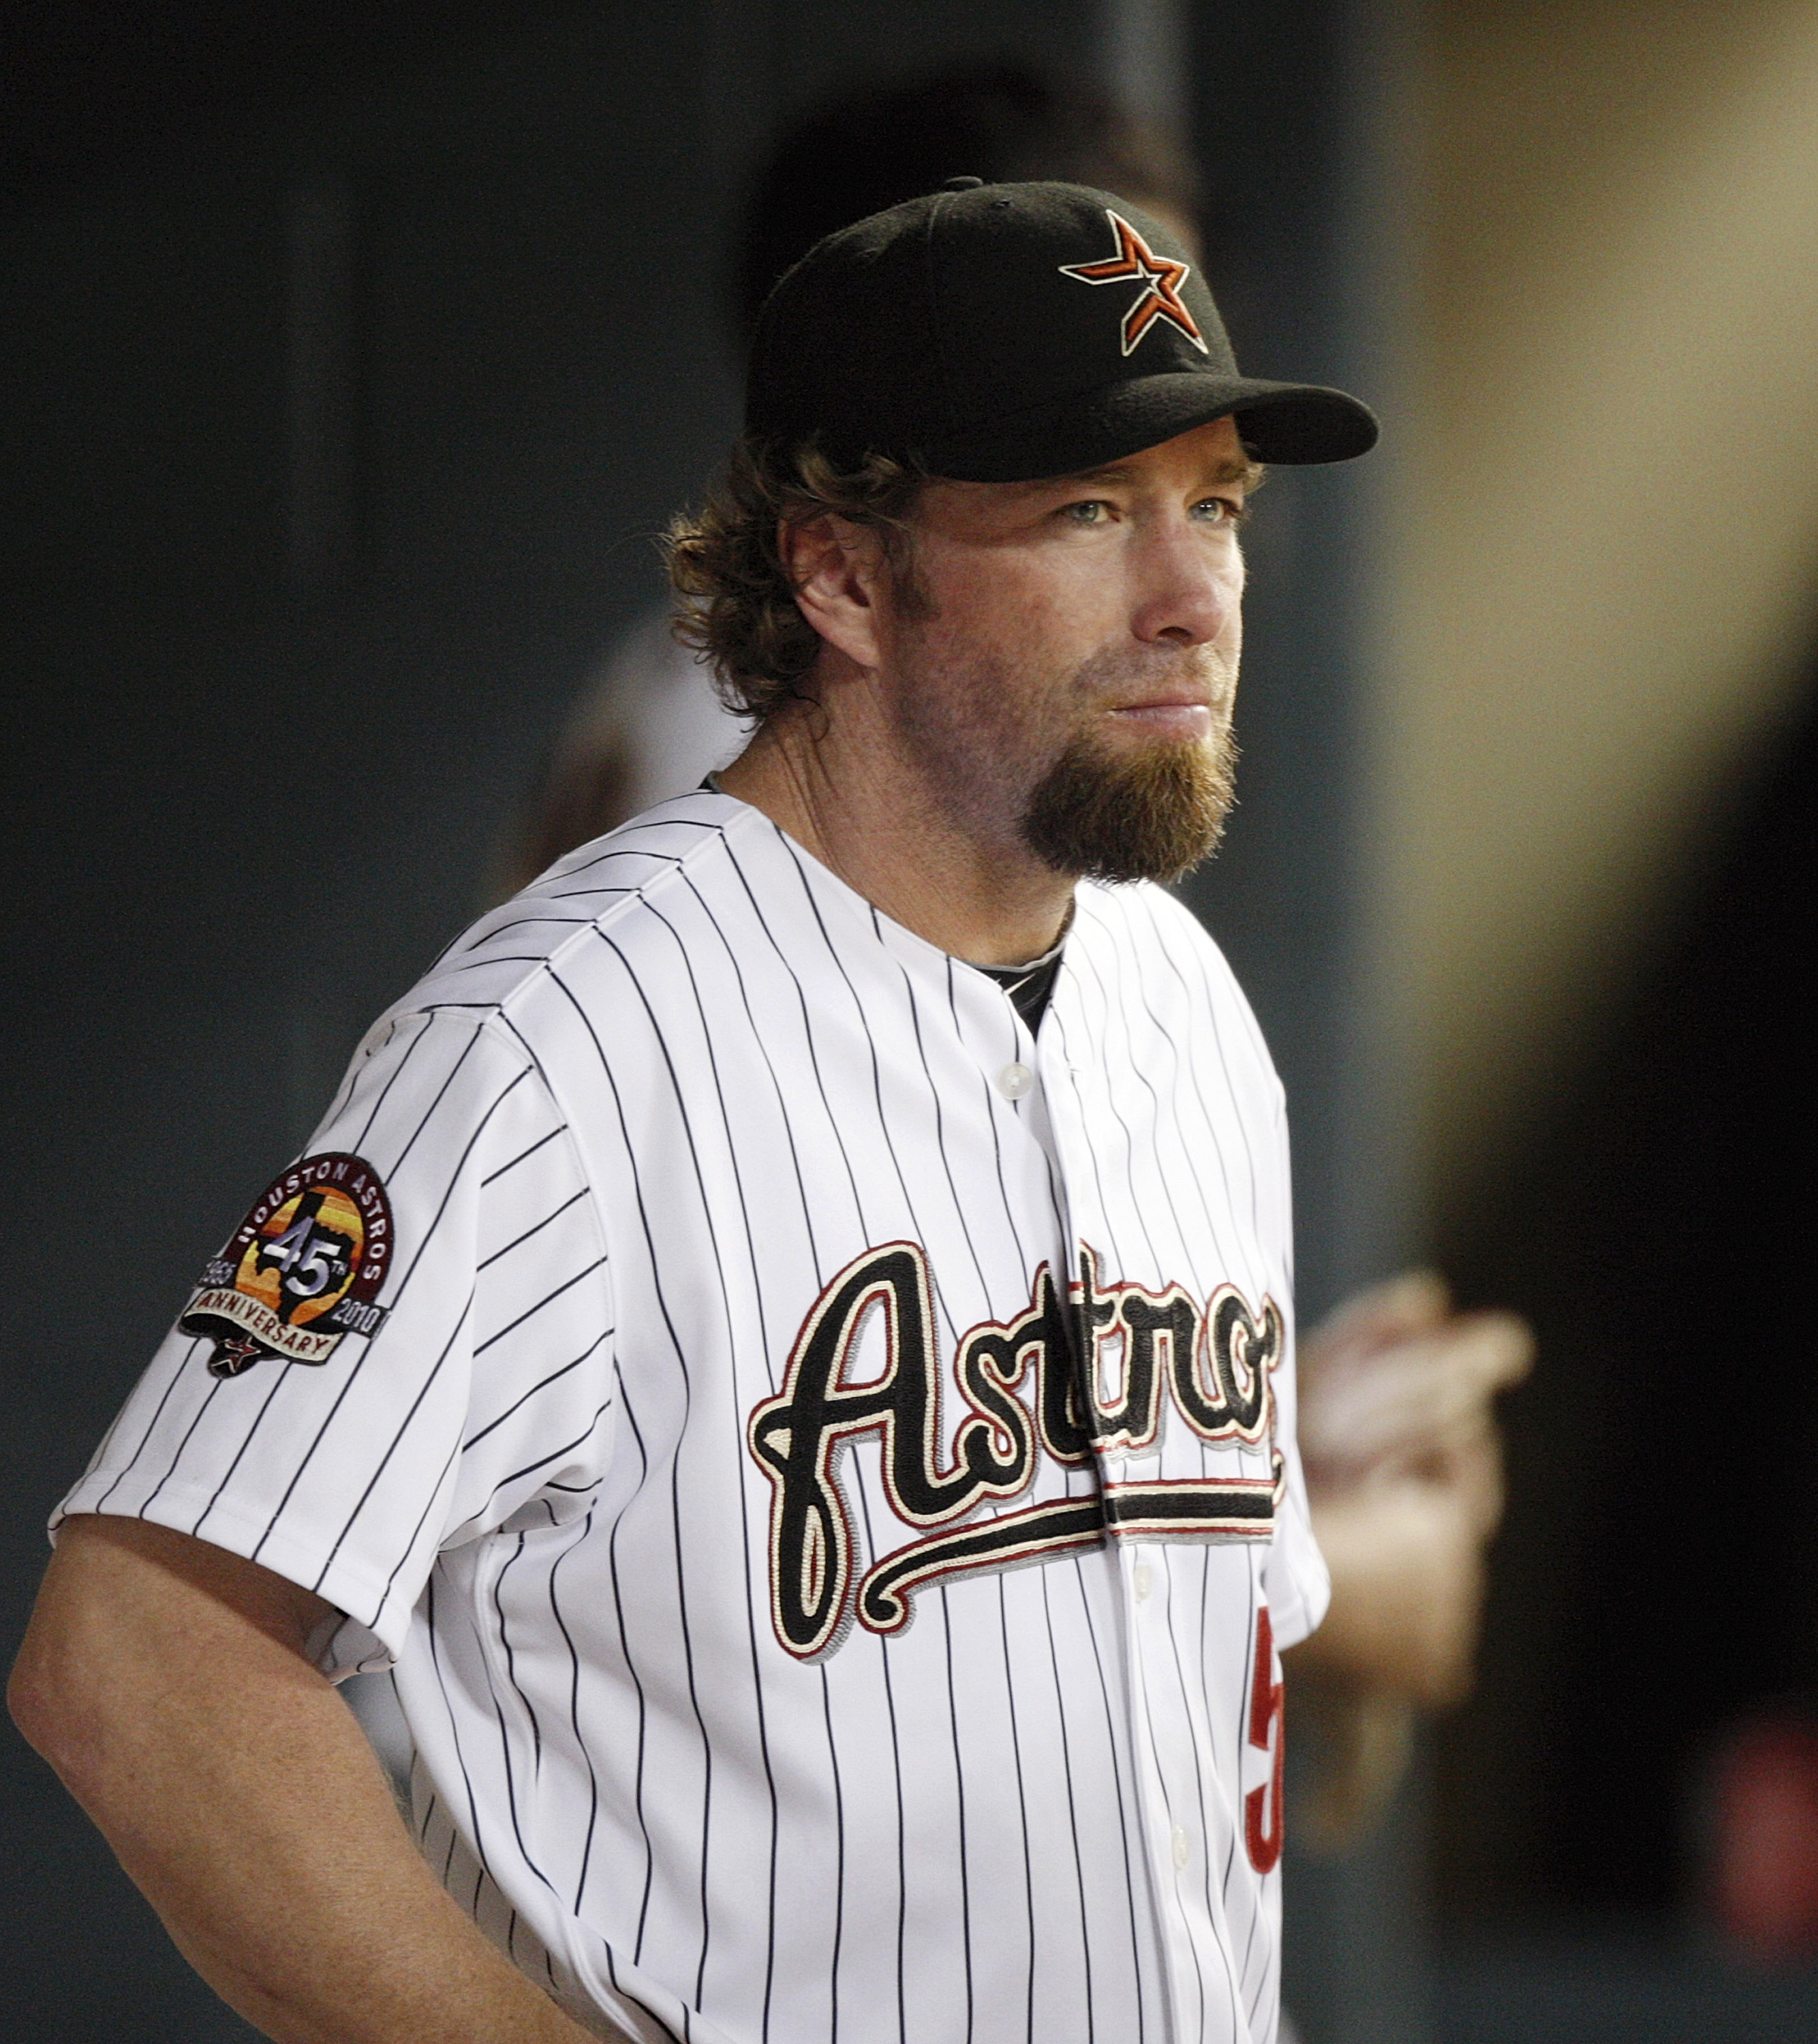 Astros Hall of Famer Jeff Bagwell savagely roasts Moneyball, Oakland A's